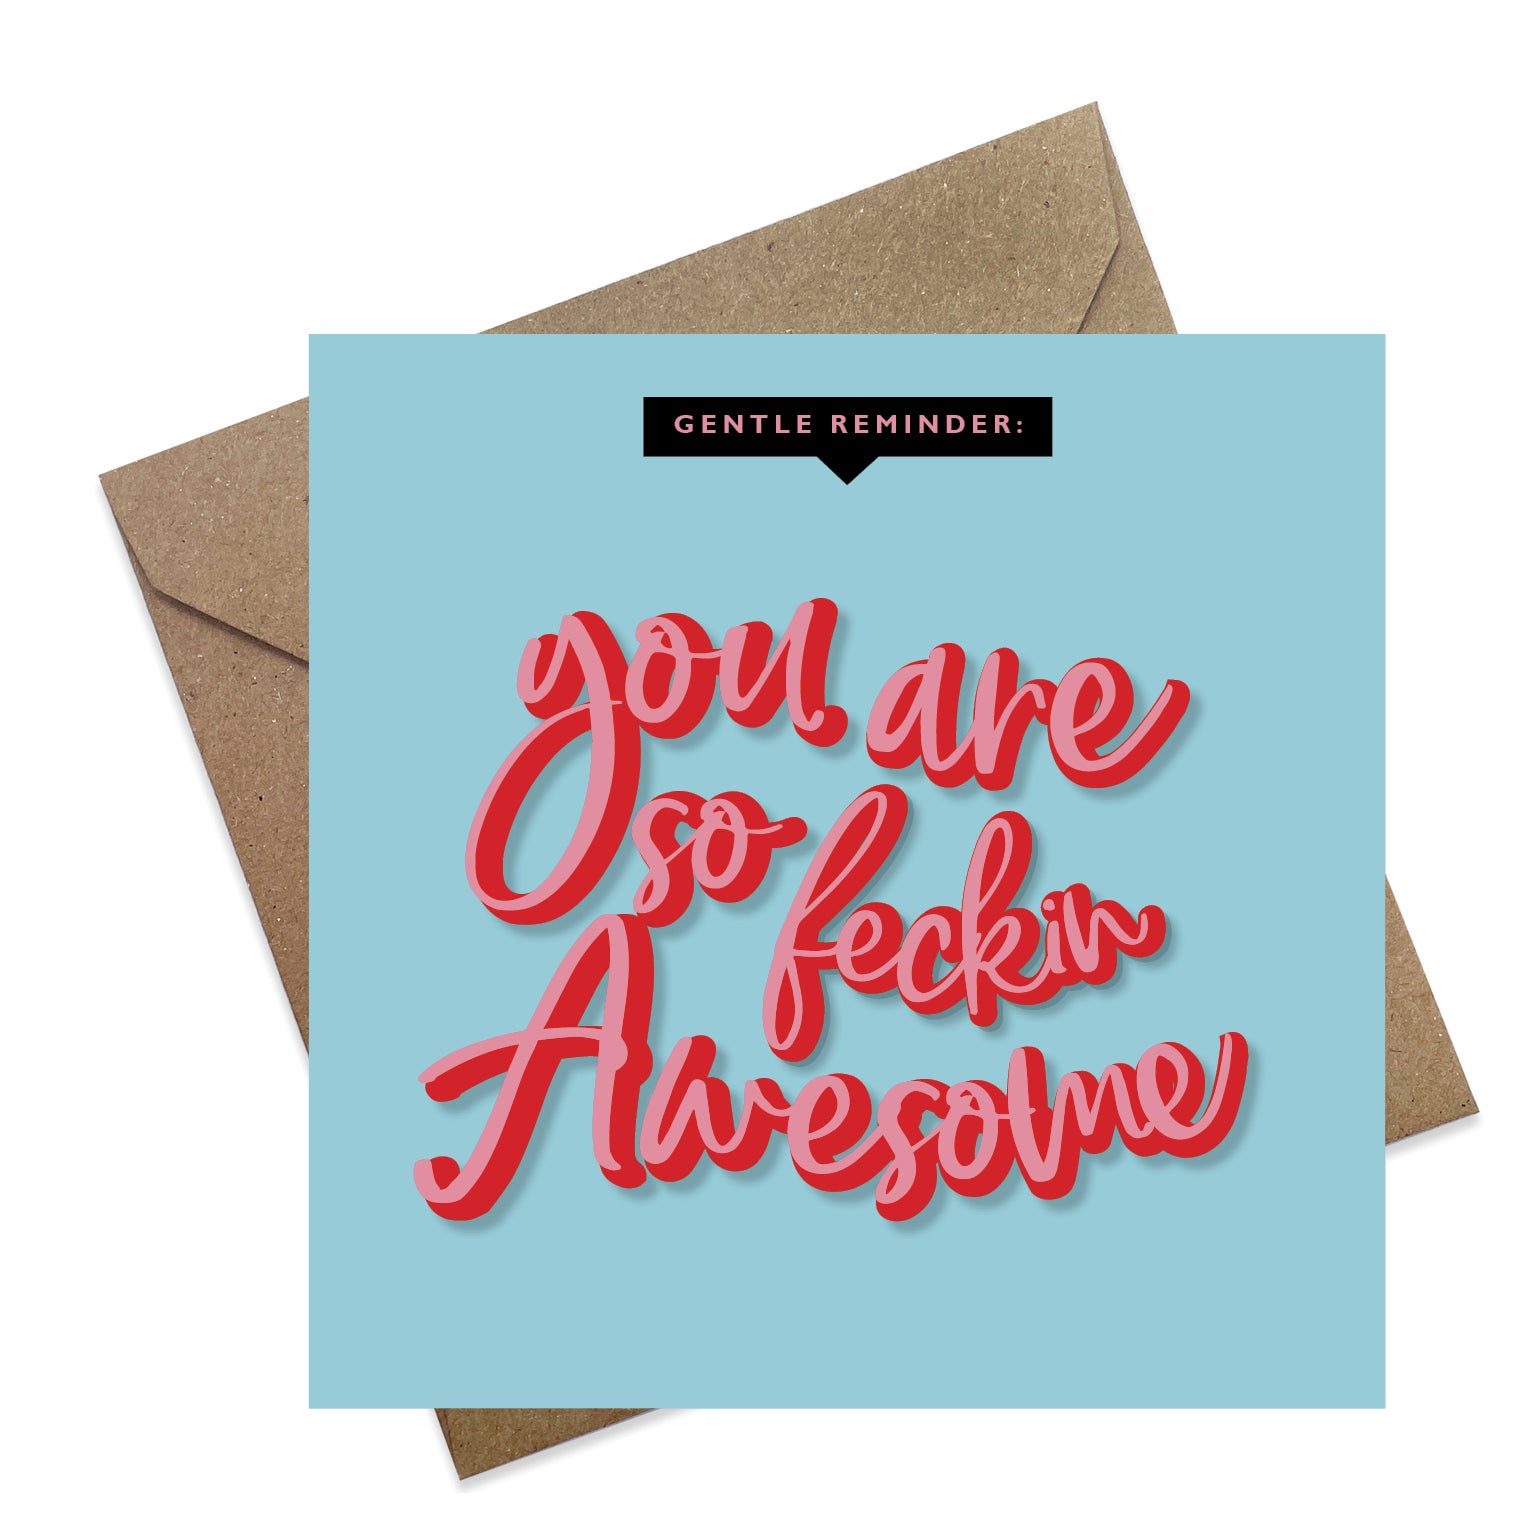 You are so feckin' awesome